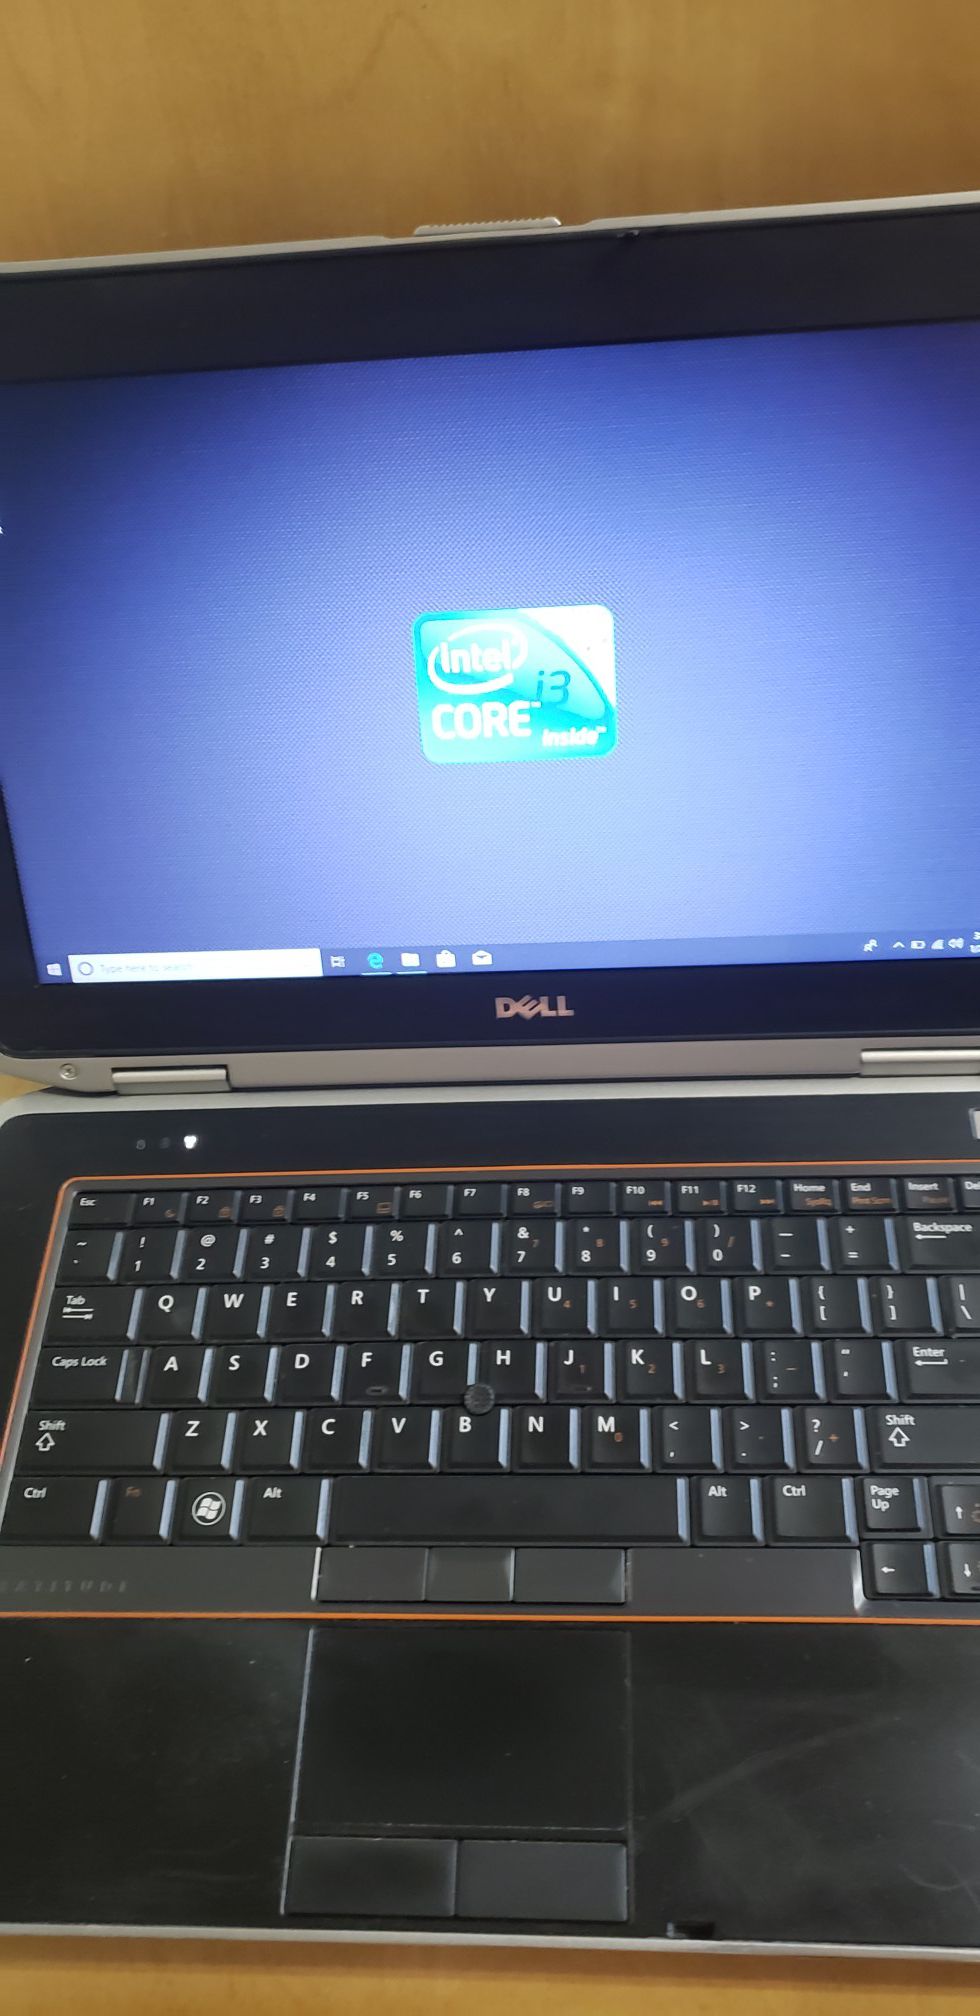 DELL LAPTOP COMPUTER 14" FAST INTEL i3 6GB RAM 1000GB HDD WINDOWS 10 OFFICE 2019 WEBCAM EVERYTHING WORKS